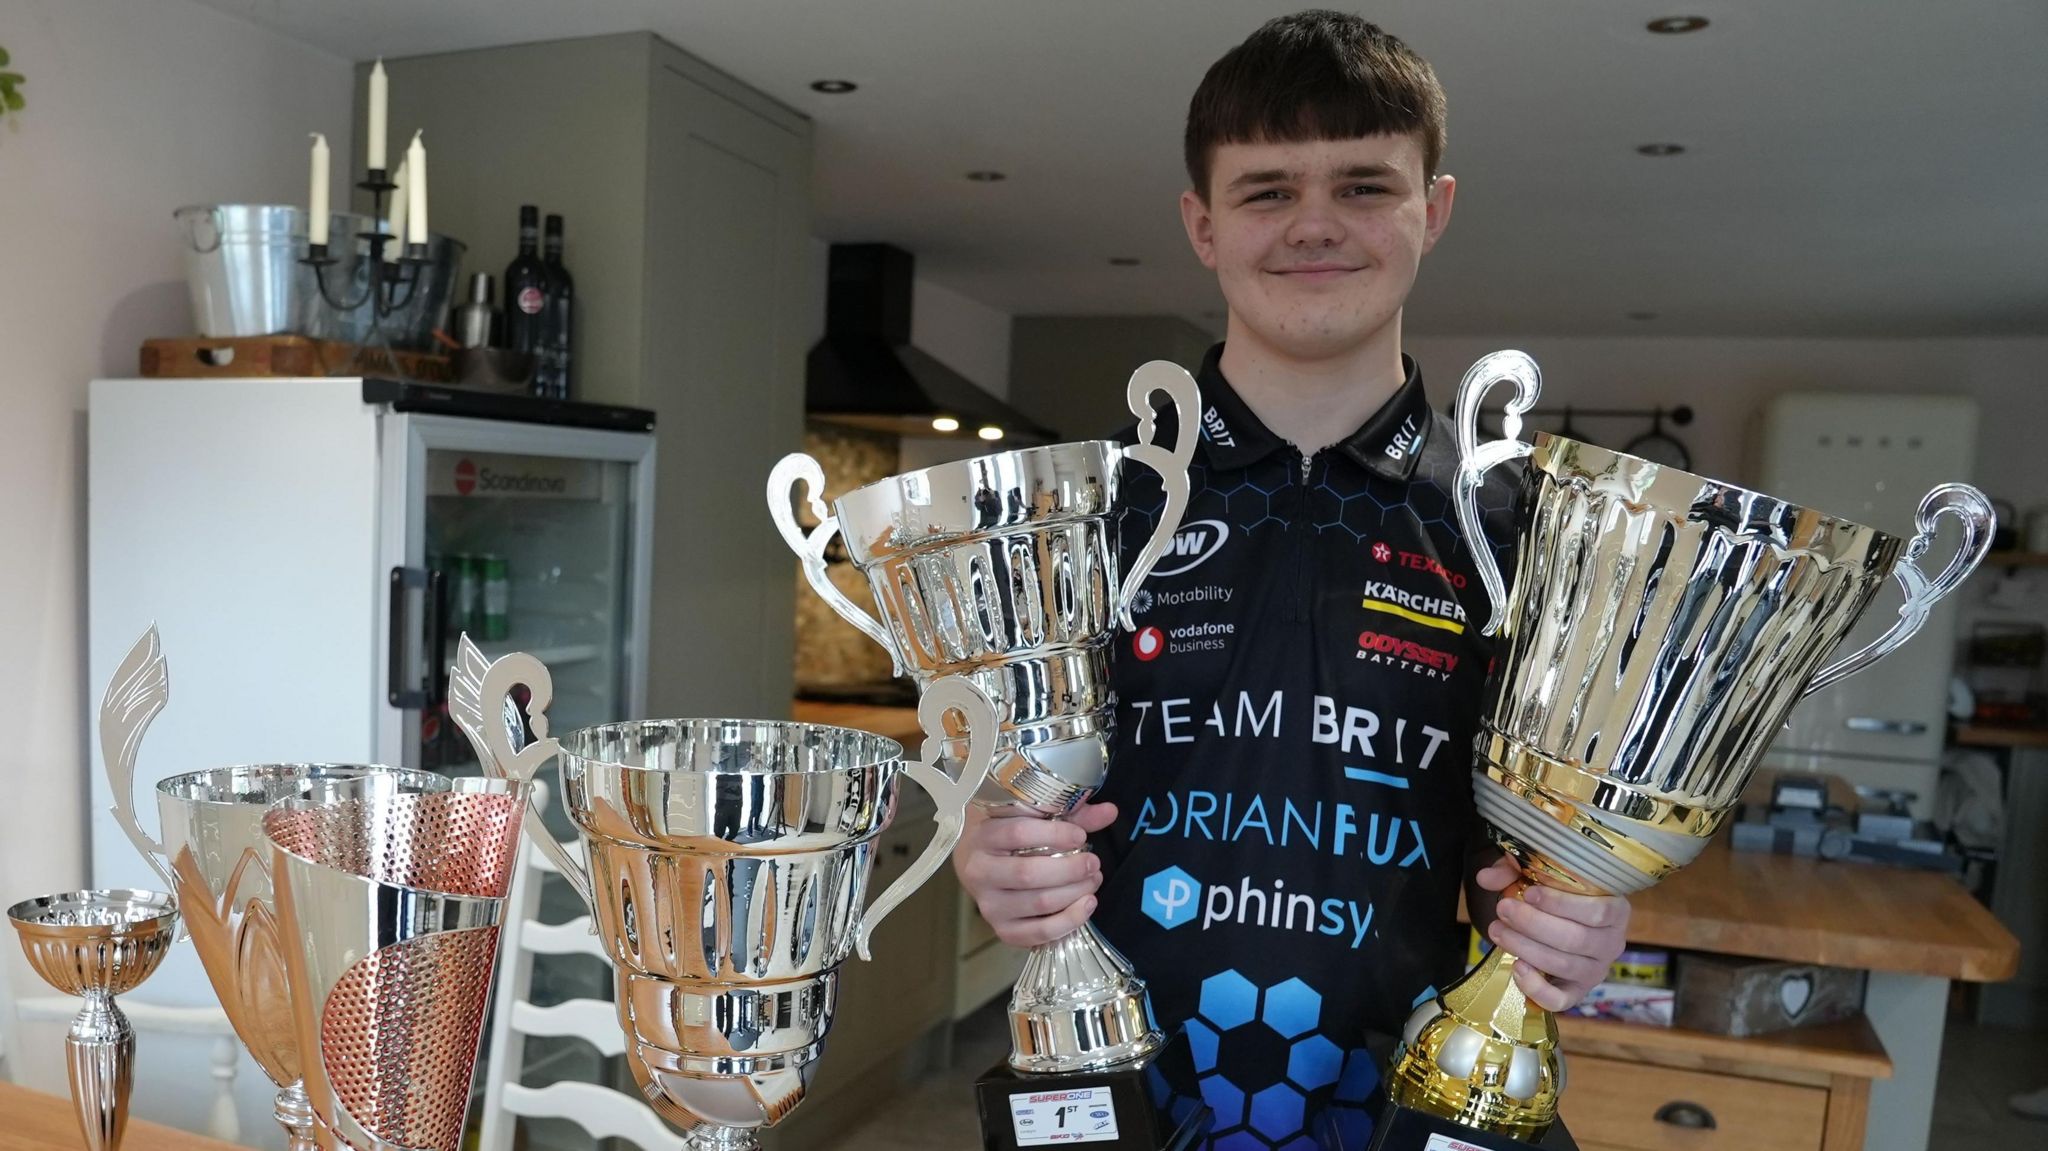 Caleb with his racing trophies